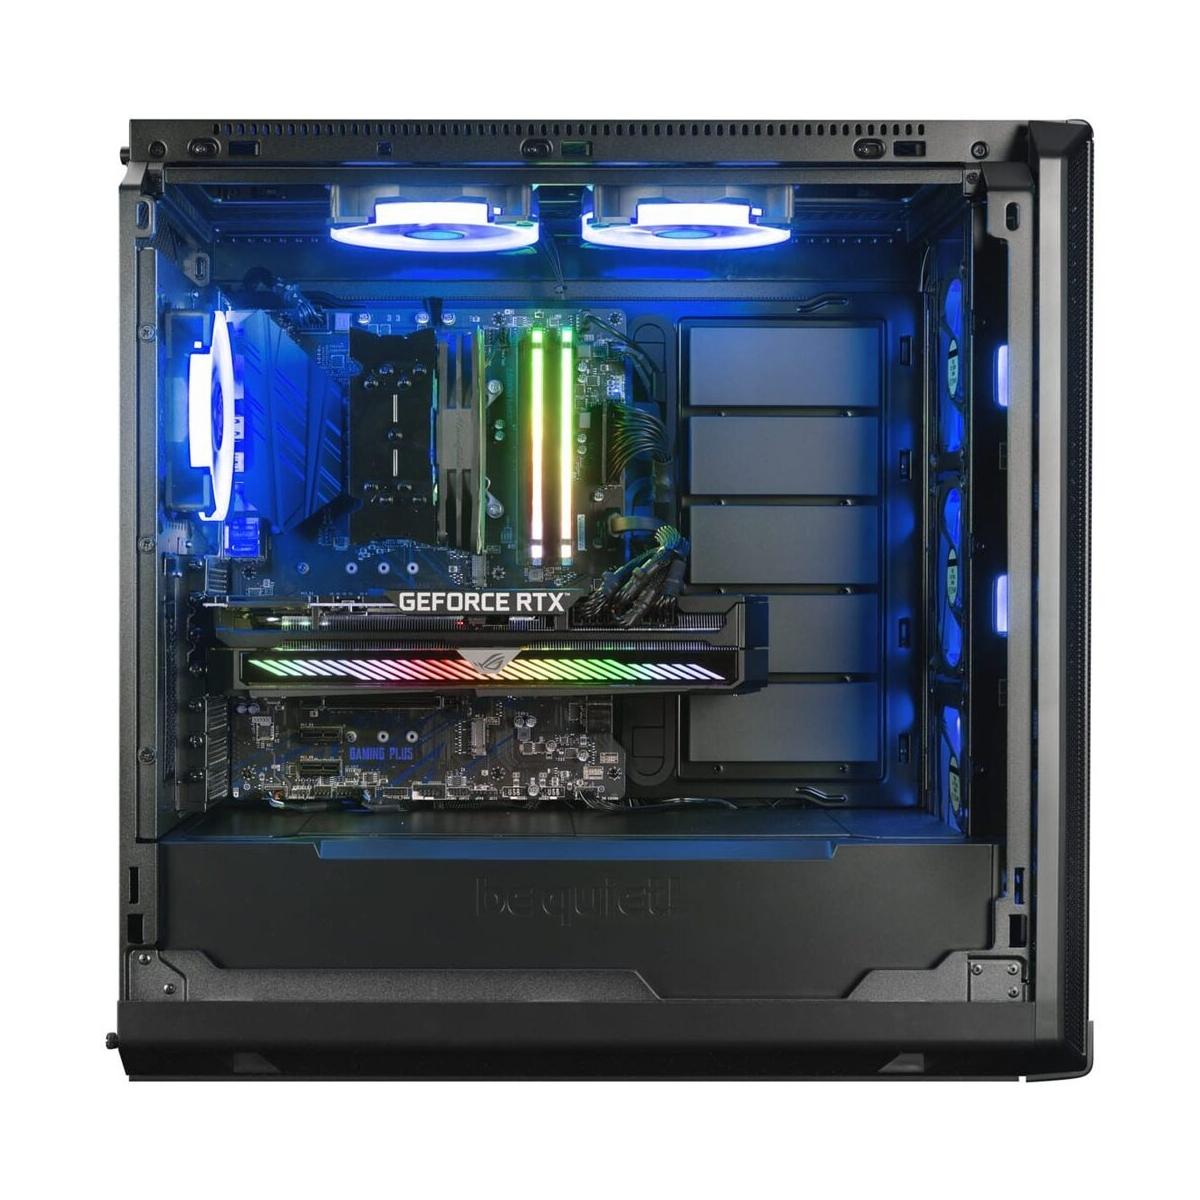 High End PC Extreme IN13 - Core i9-12900KS - RTX 3090 Ti